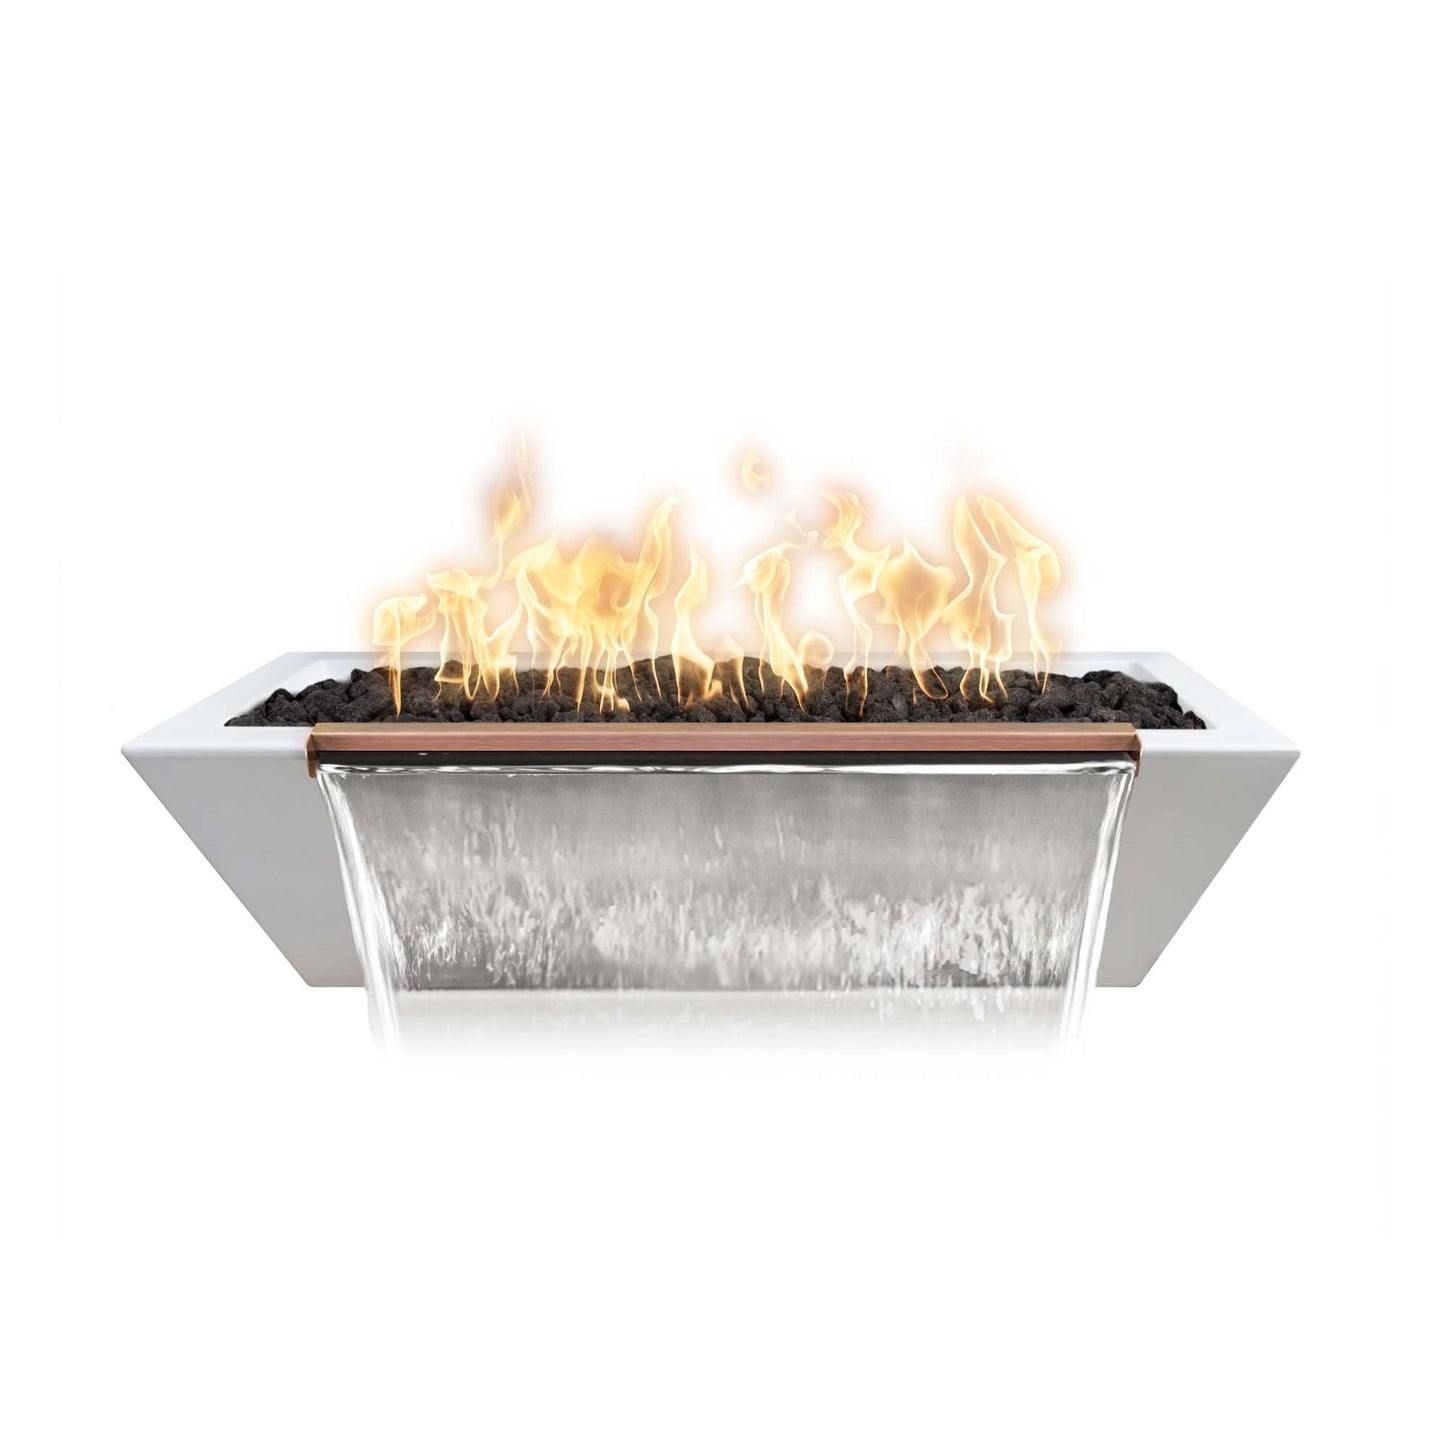 The Outdoor Plus Linear Maya 48" White GFRC Concrete Liquid Propane Fire & Water Bowl with Match Lit with Flame Sense Ignition